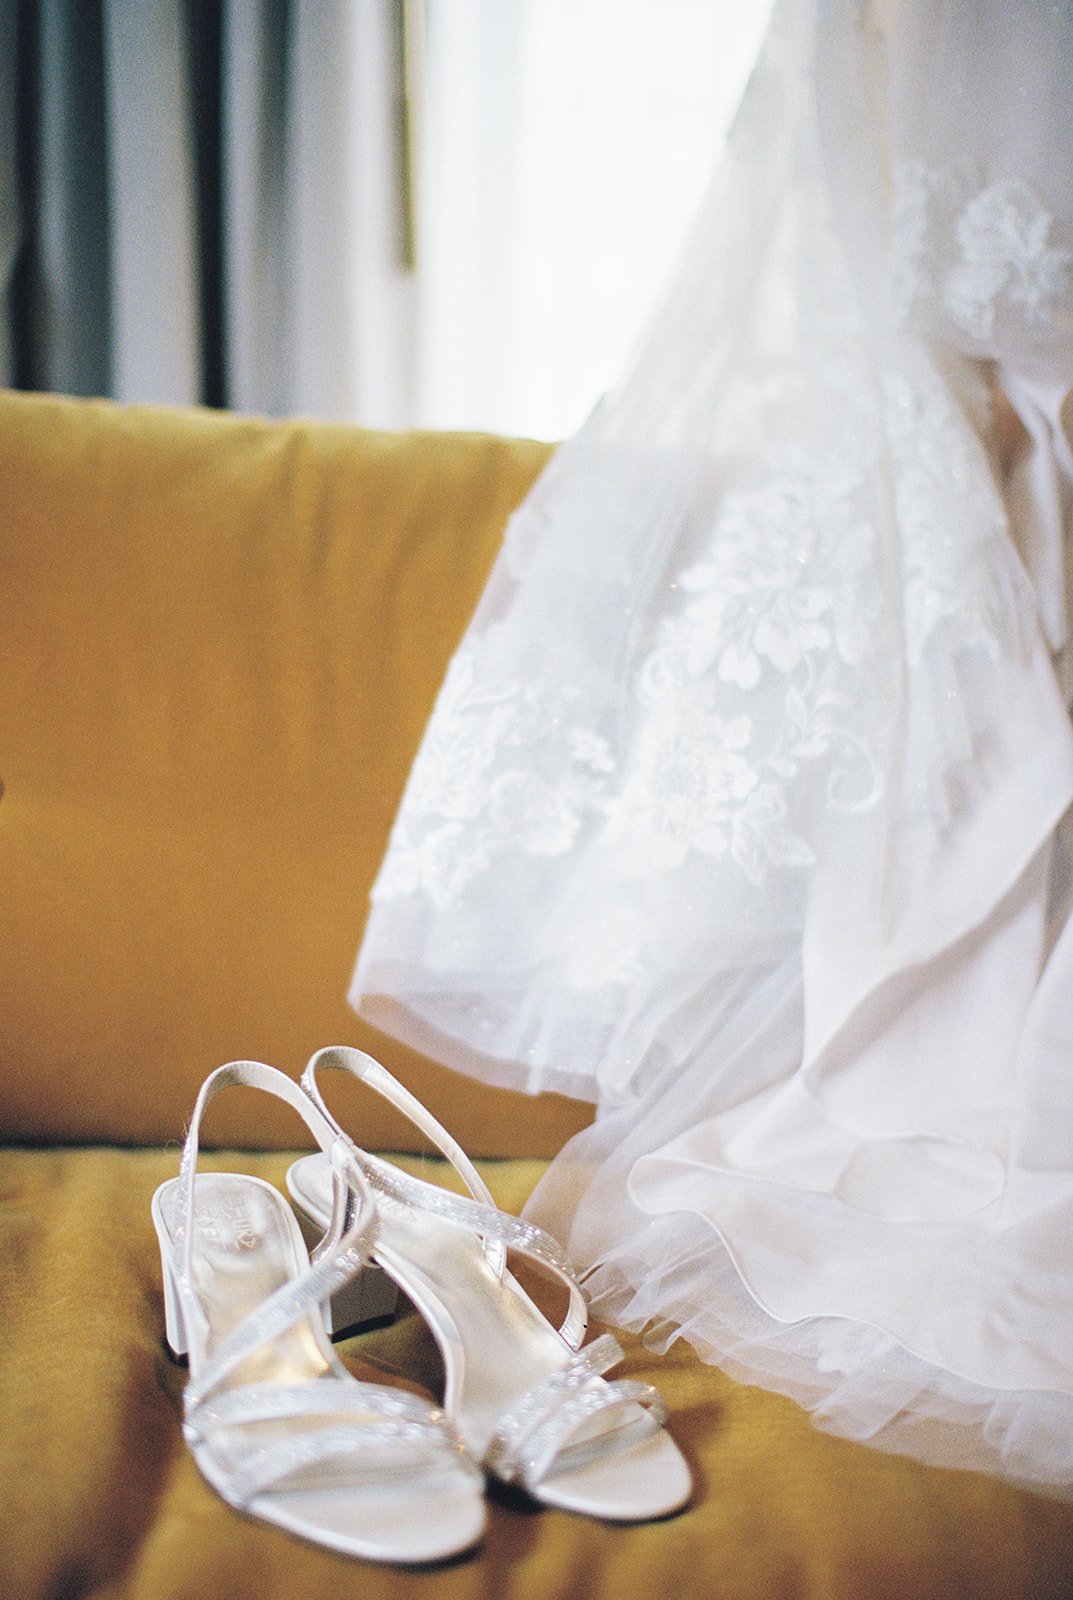 wedding shoes next to white wedding dress on yellow couch